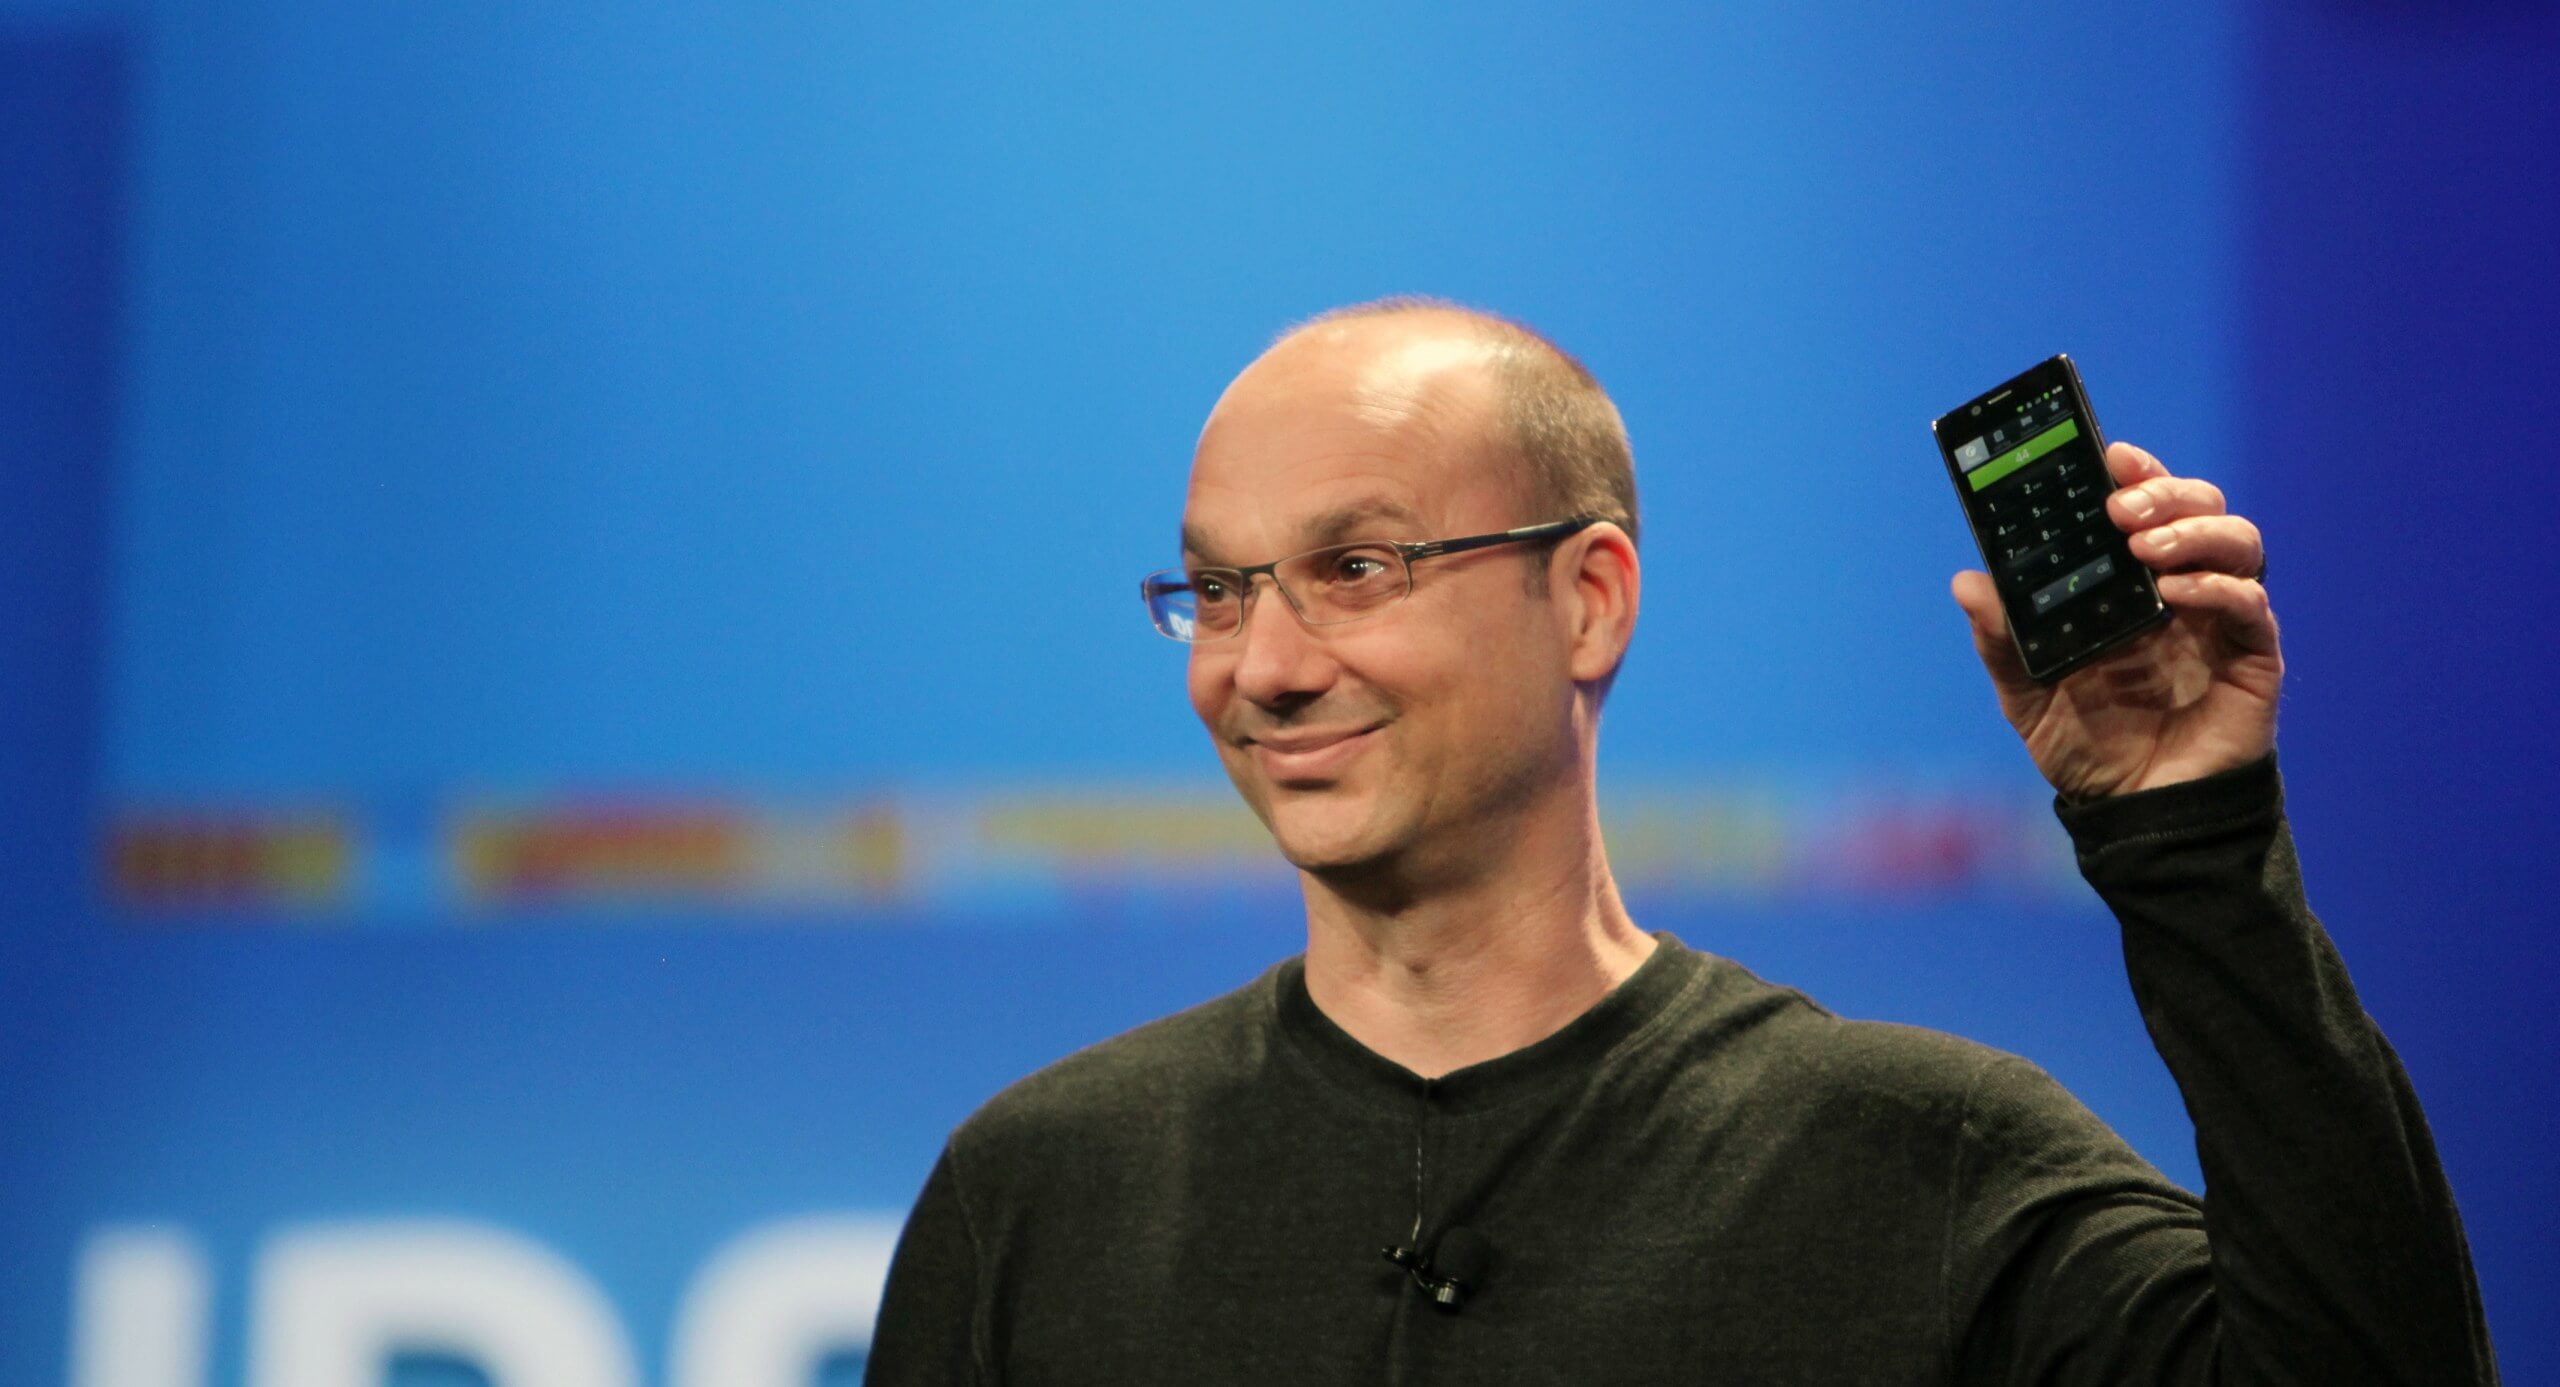 'Father of Android' Andy Rubin allegedly protected by Google from sexual misconduct claims